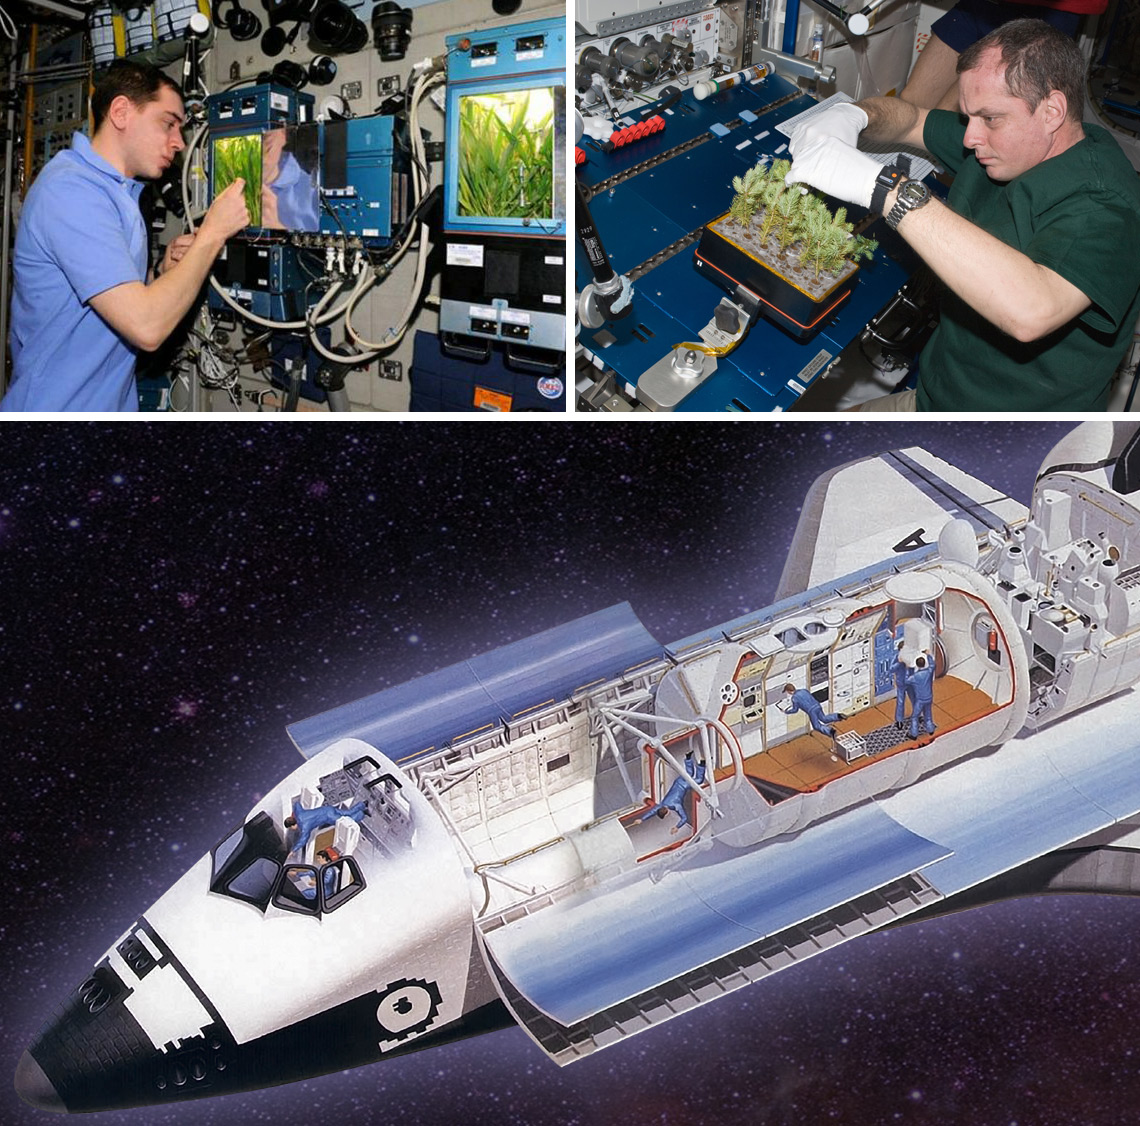 Experiments on the Space Shuttle were conducted in Spacelab.